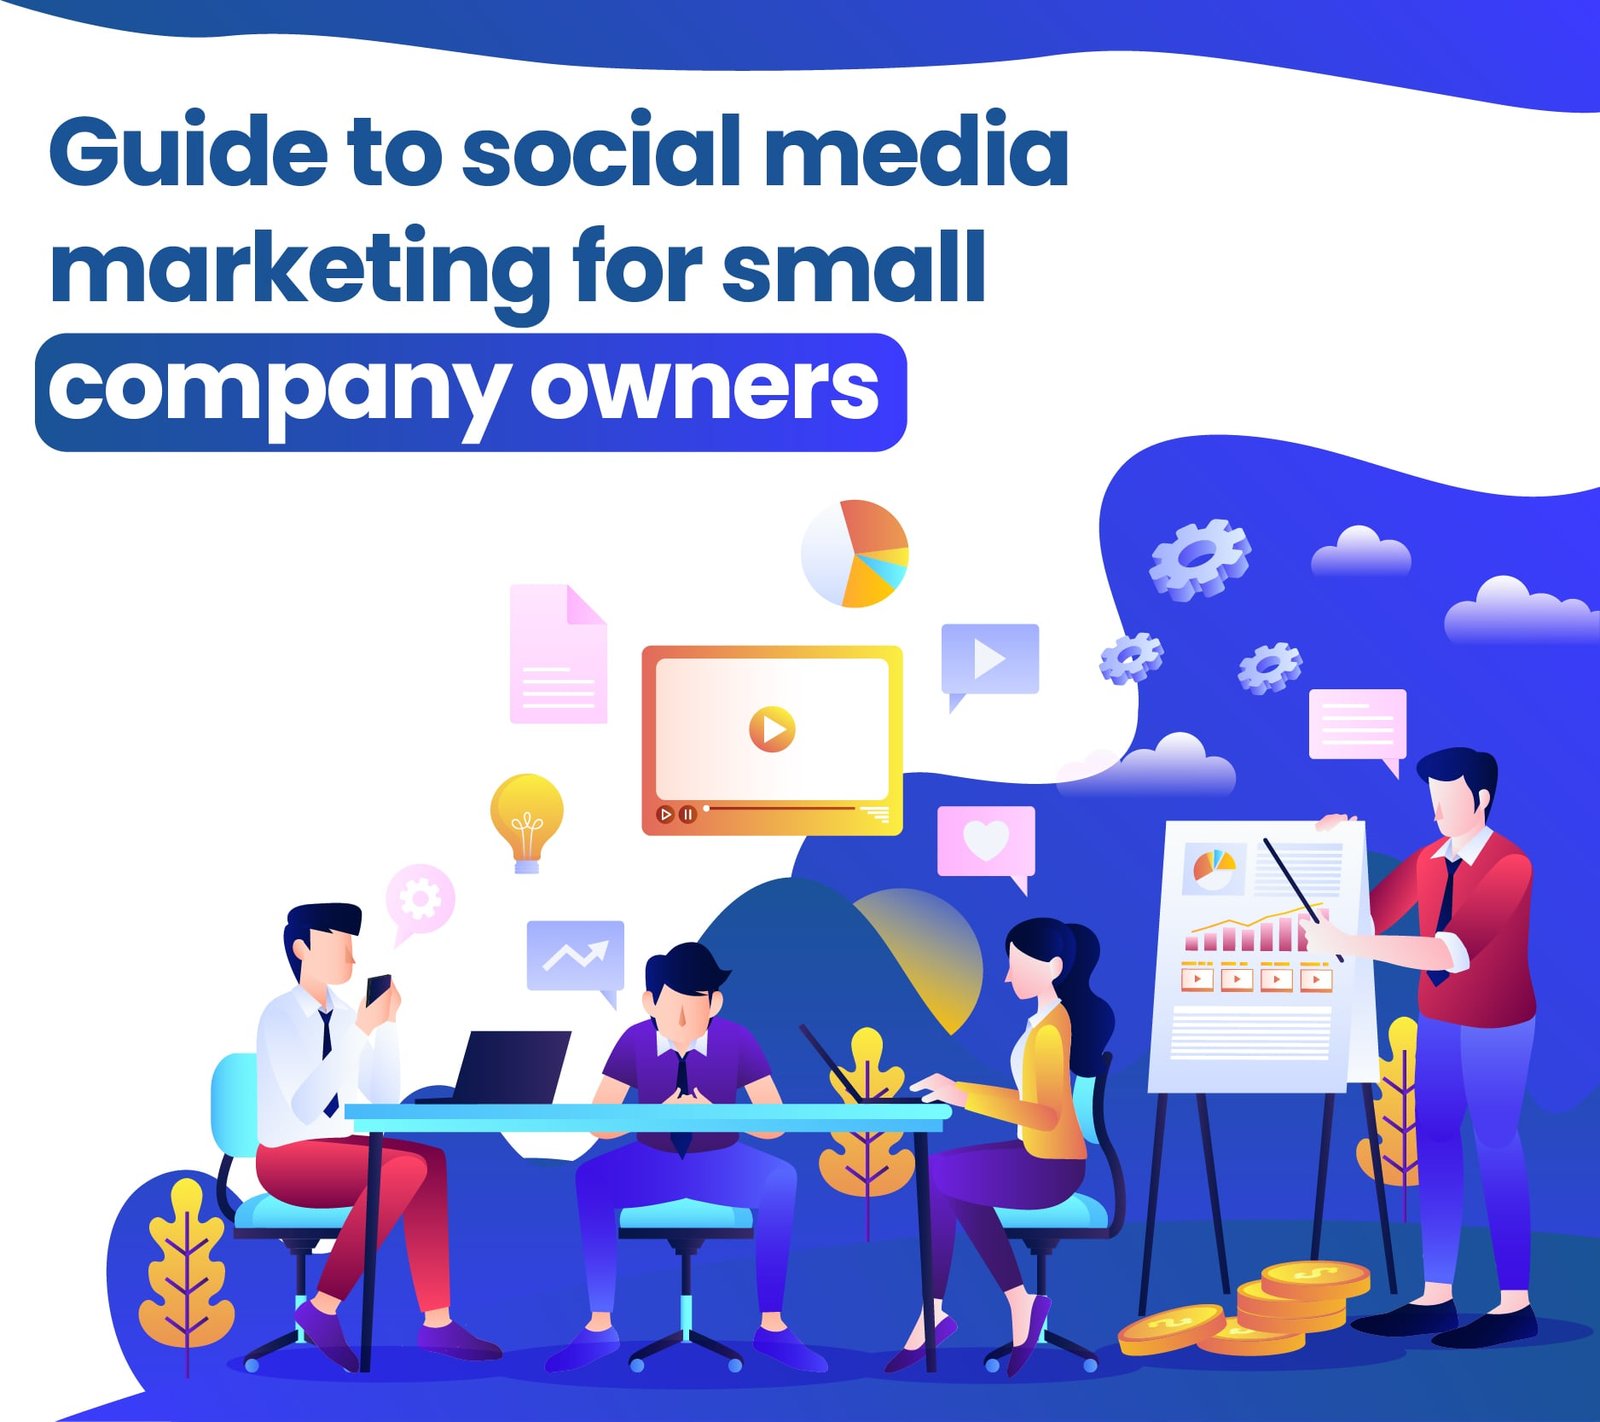 Guide to social media marketing for small company owners